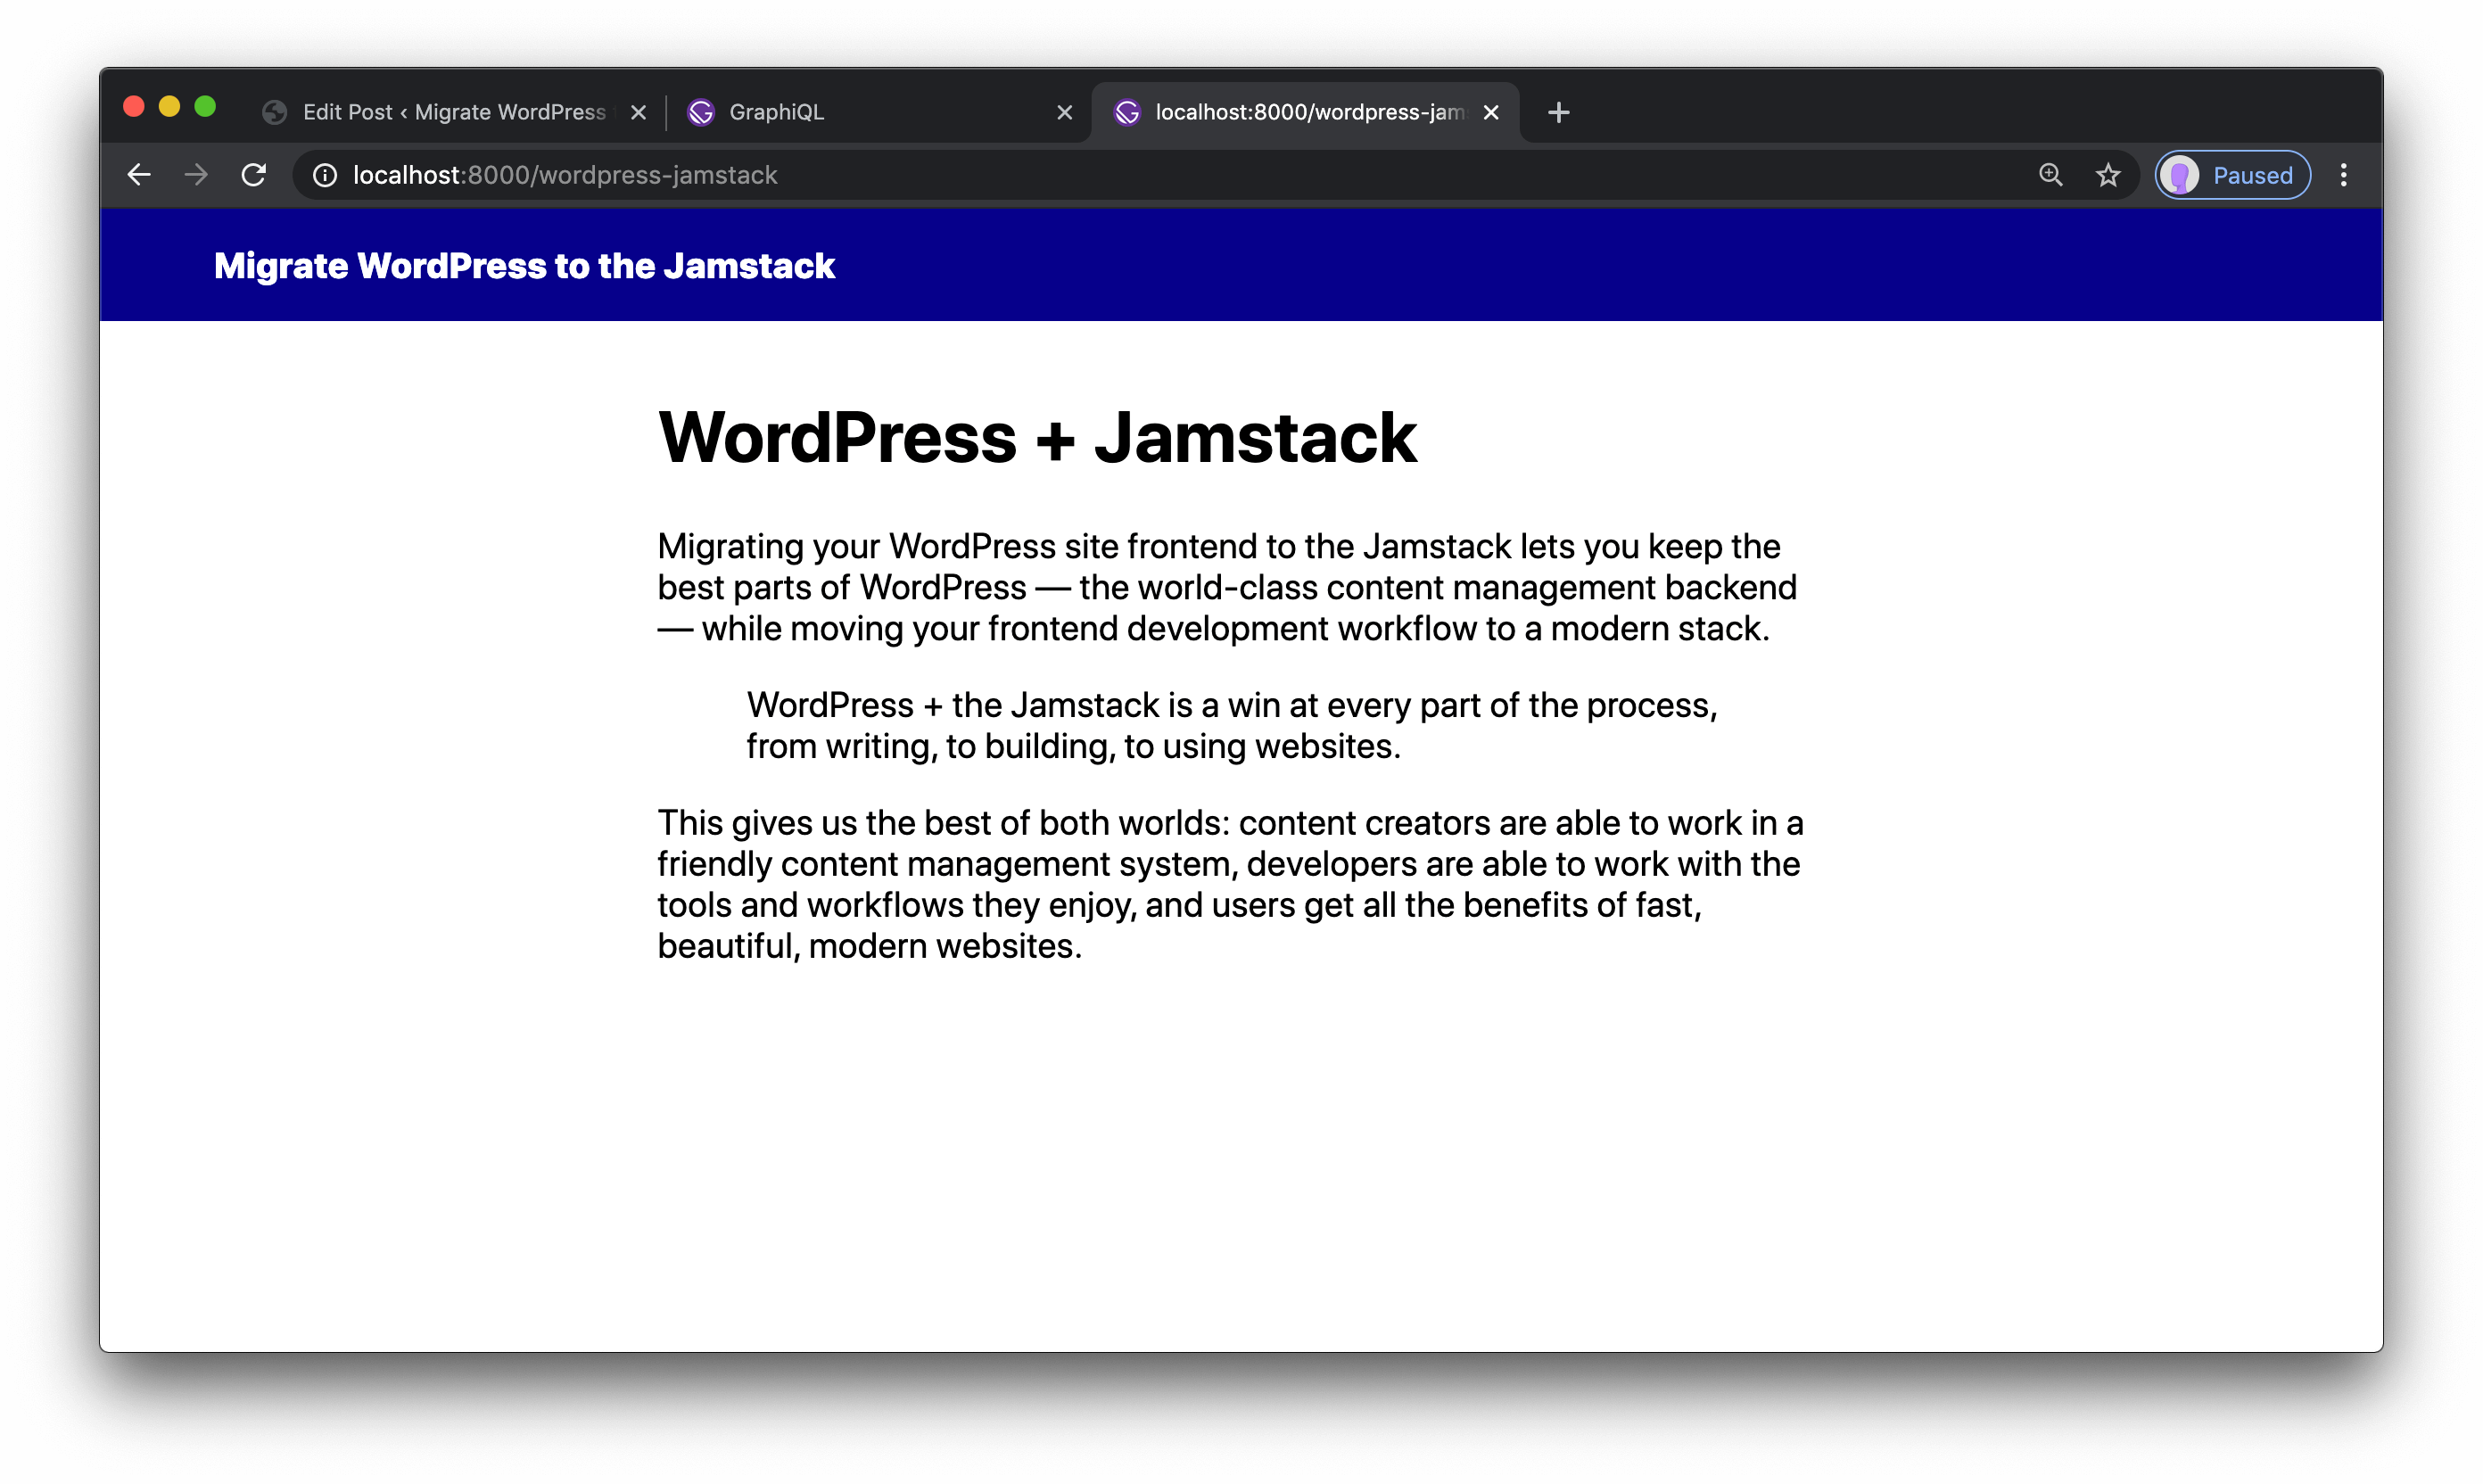 A blog post from WordPress displayed in Gatsby.